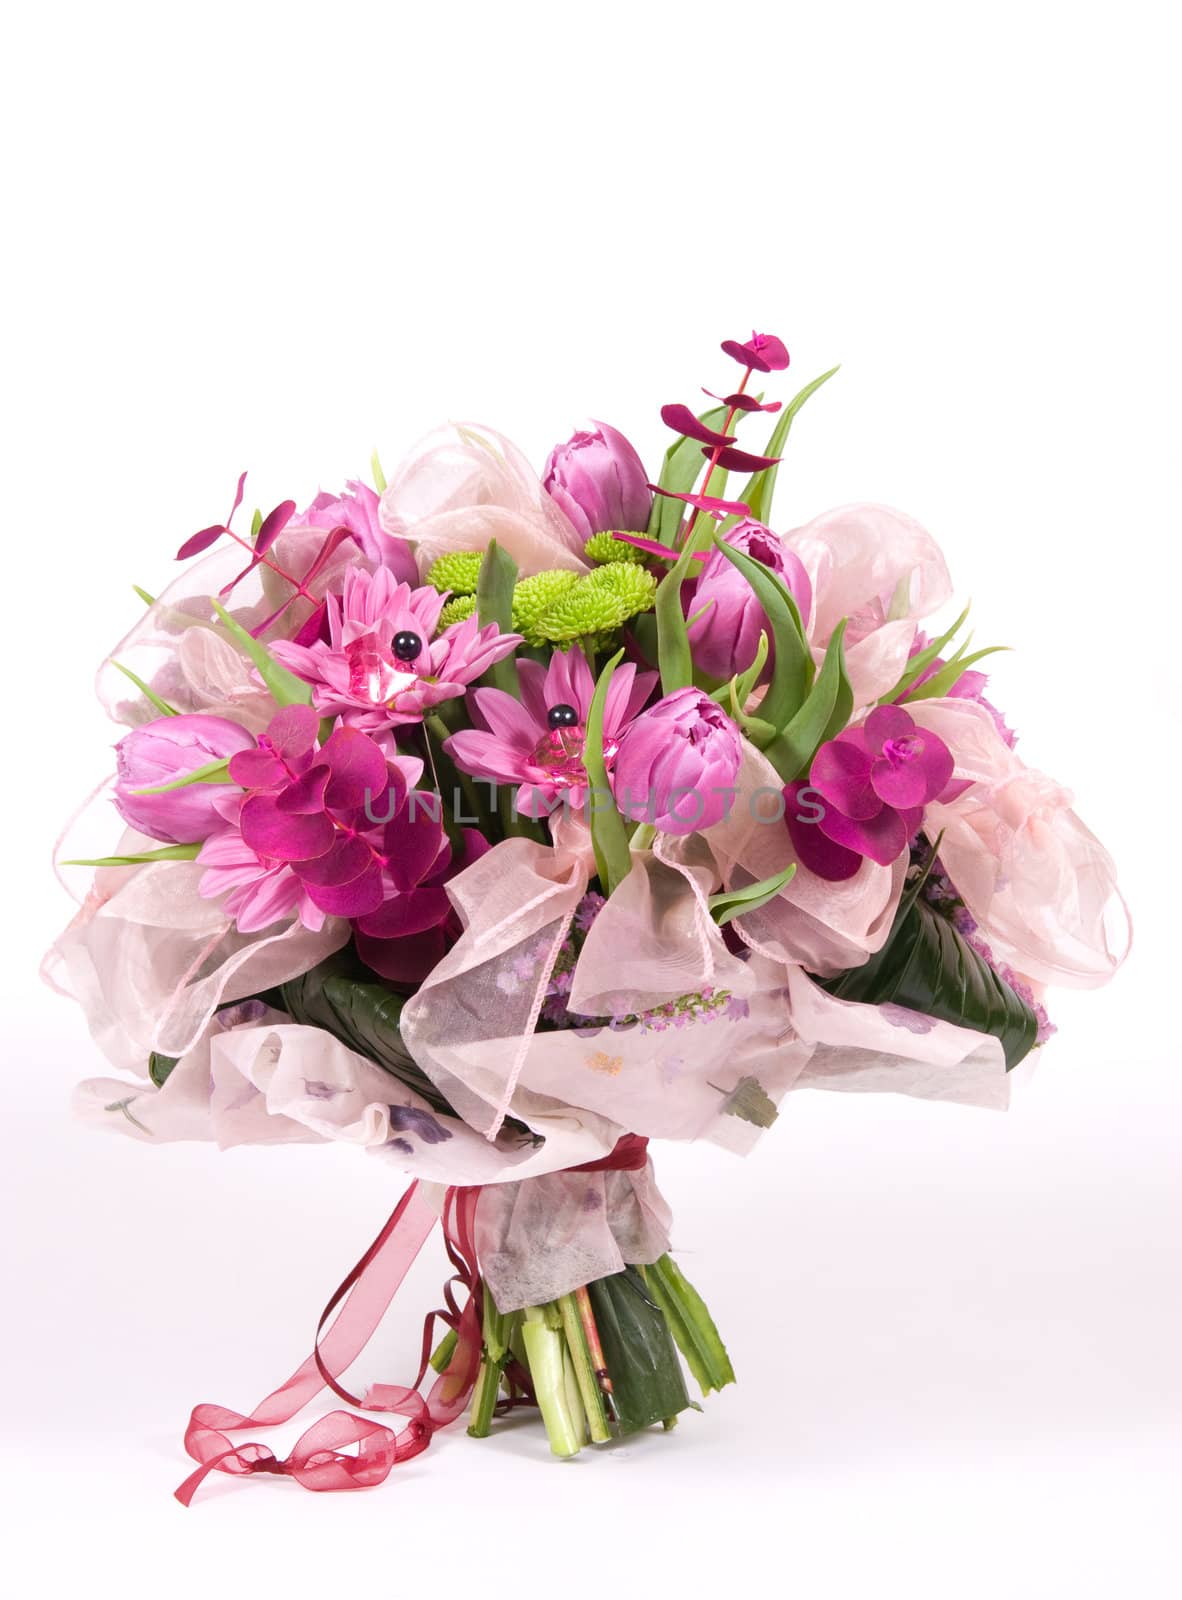 Violet bouquet made of varied beautiful flowers